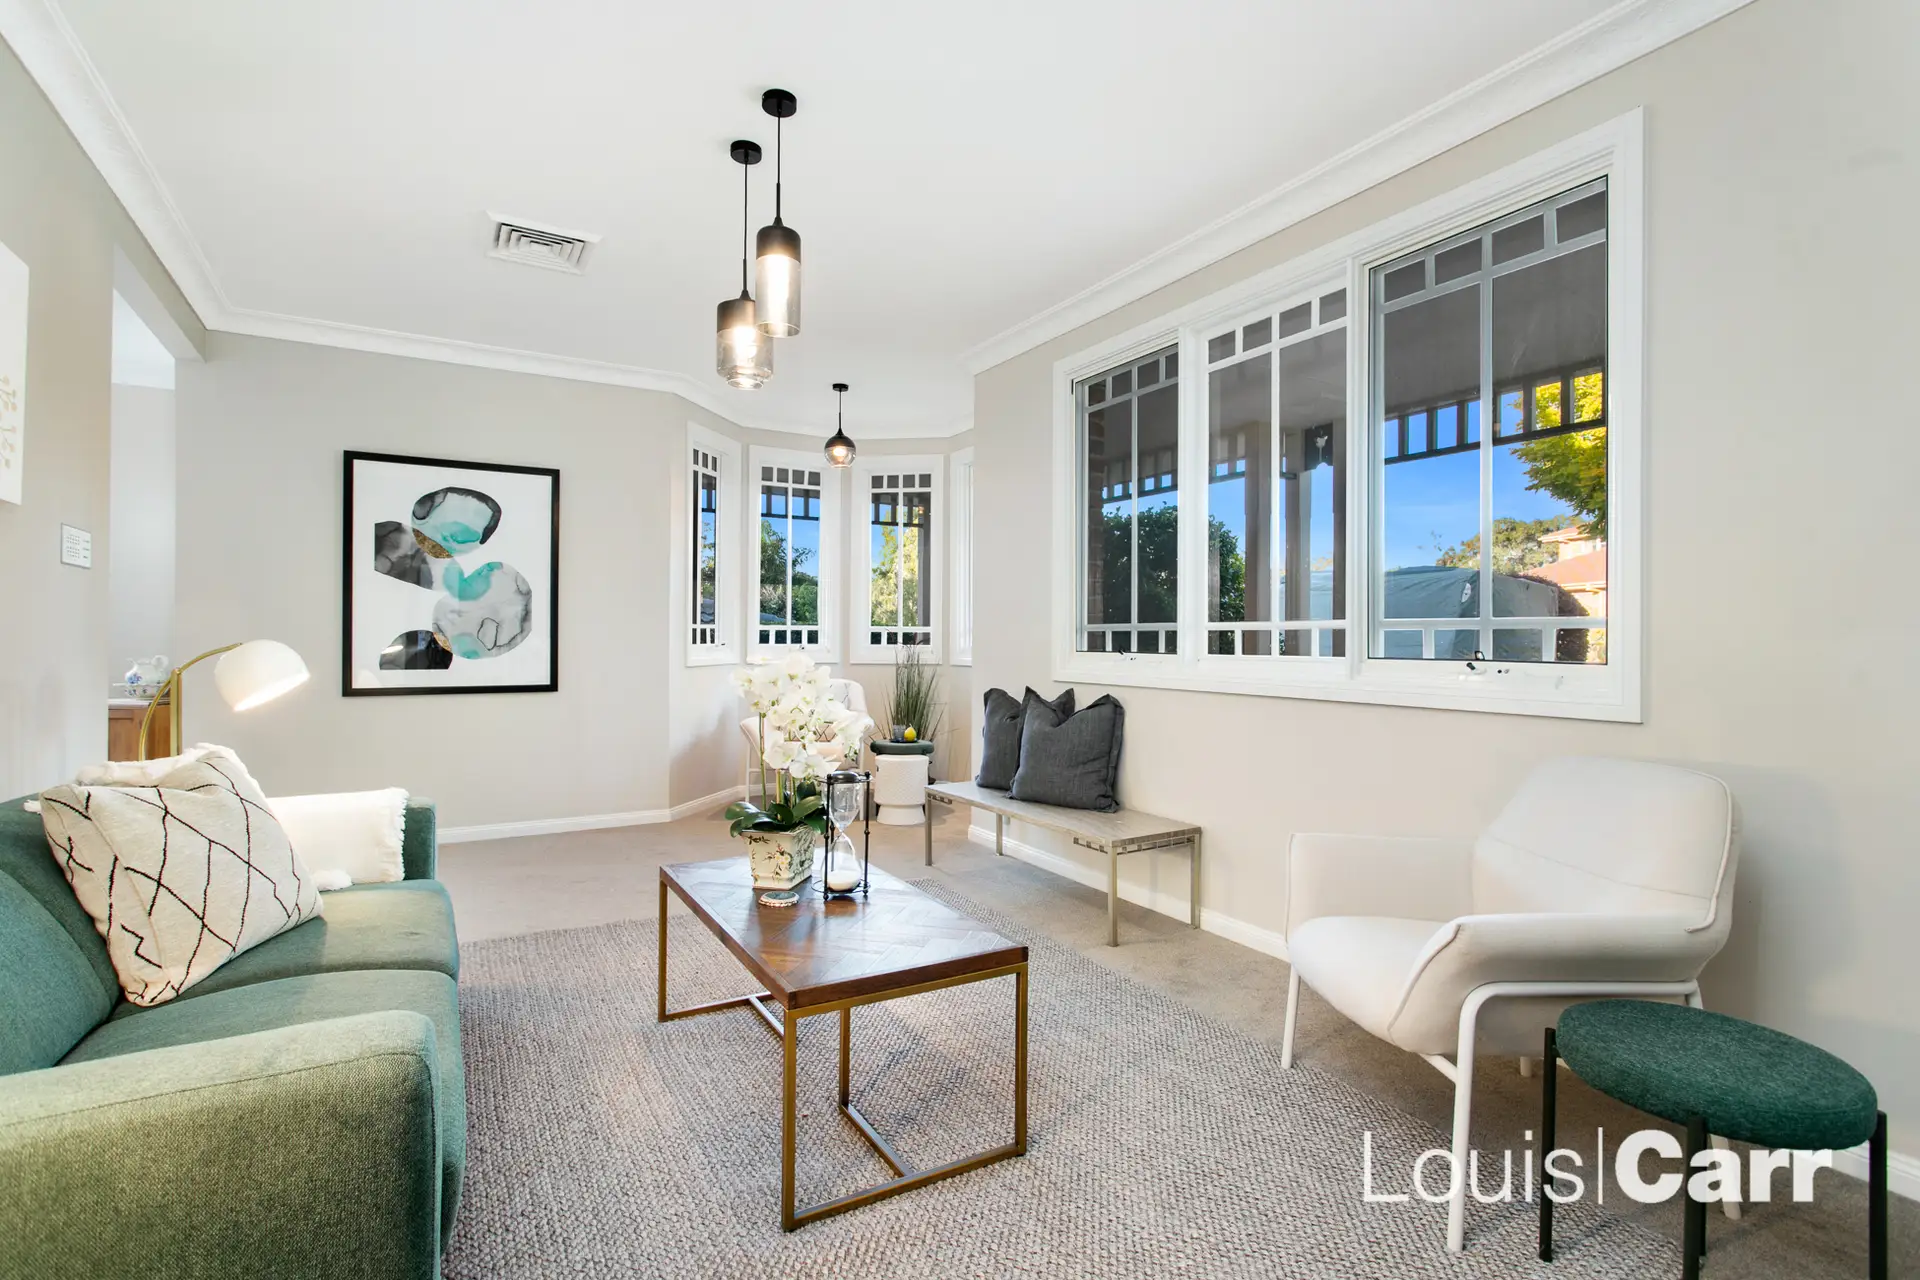 Photo #3: 5 Thornbill Way, West Pennant Hills - Sold by Louis Carr Real Estate